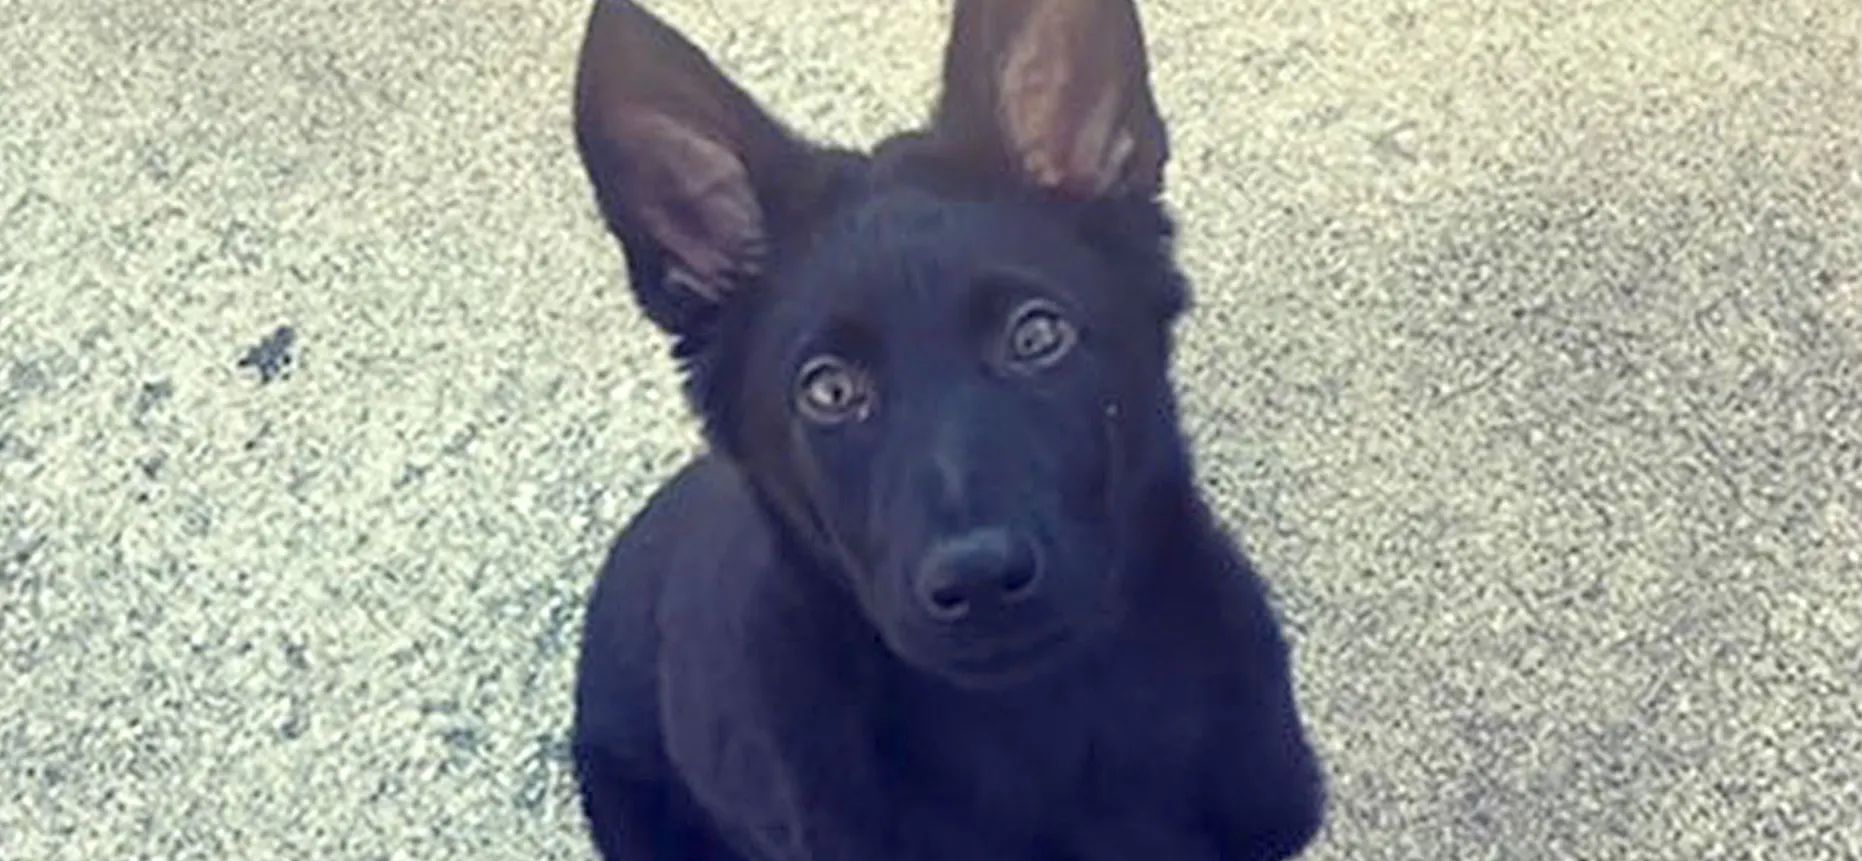 Kansas Police Officer’s 3-Month-Old Puppy Brutally Murdered In Targeted Attack